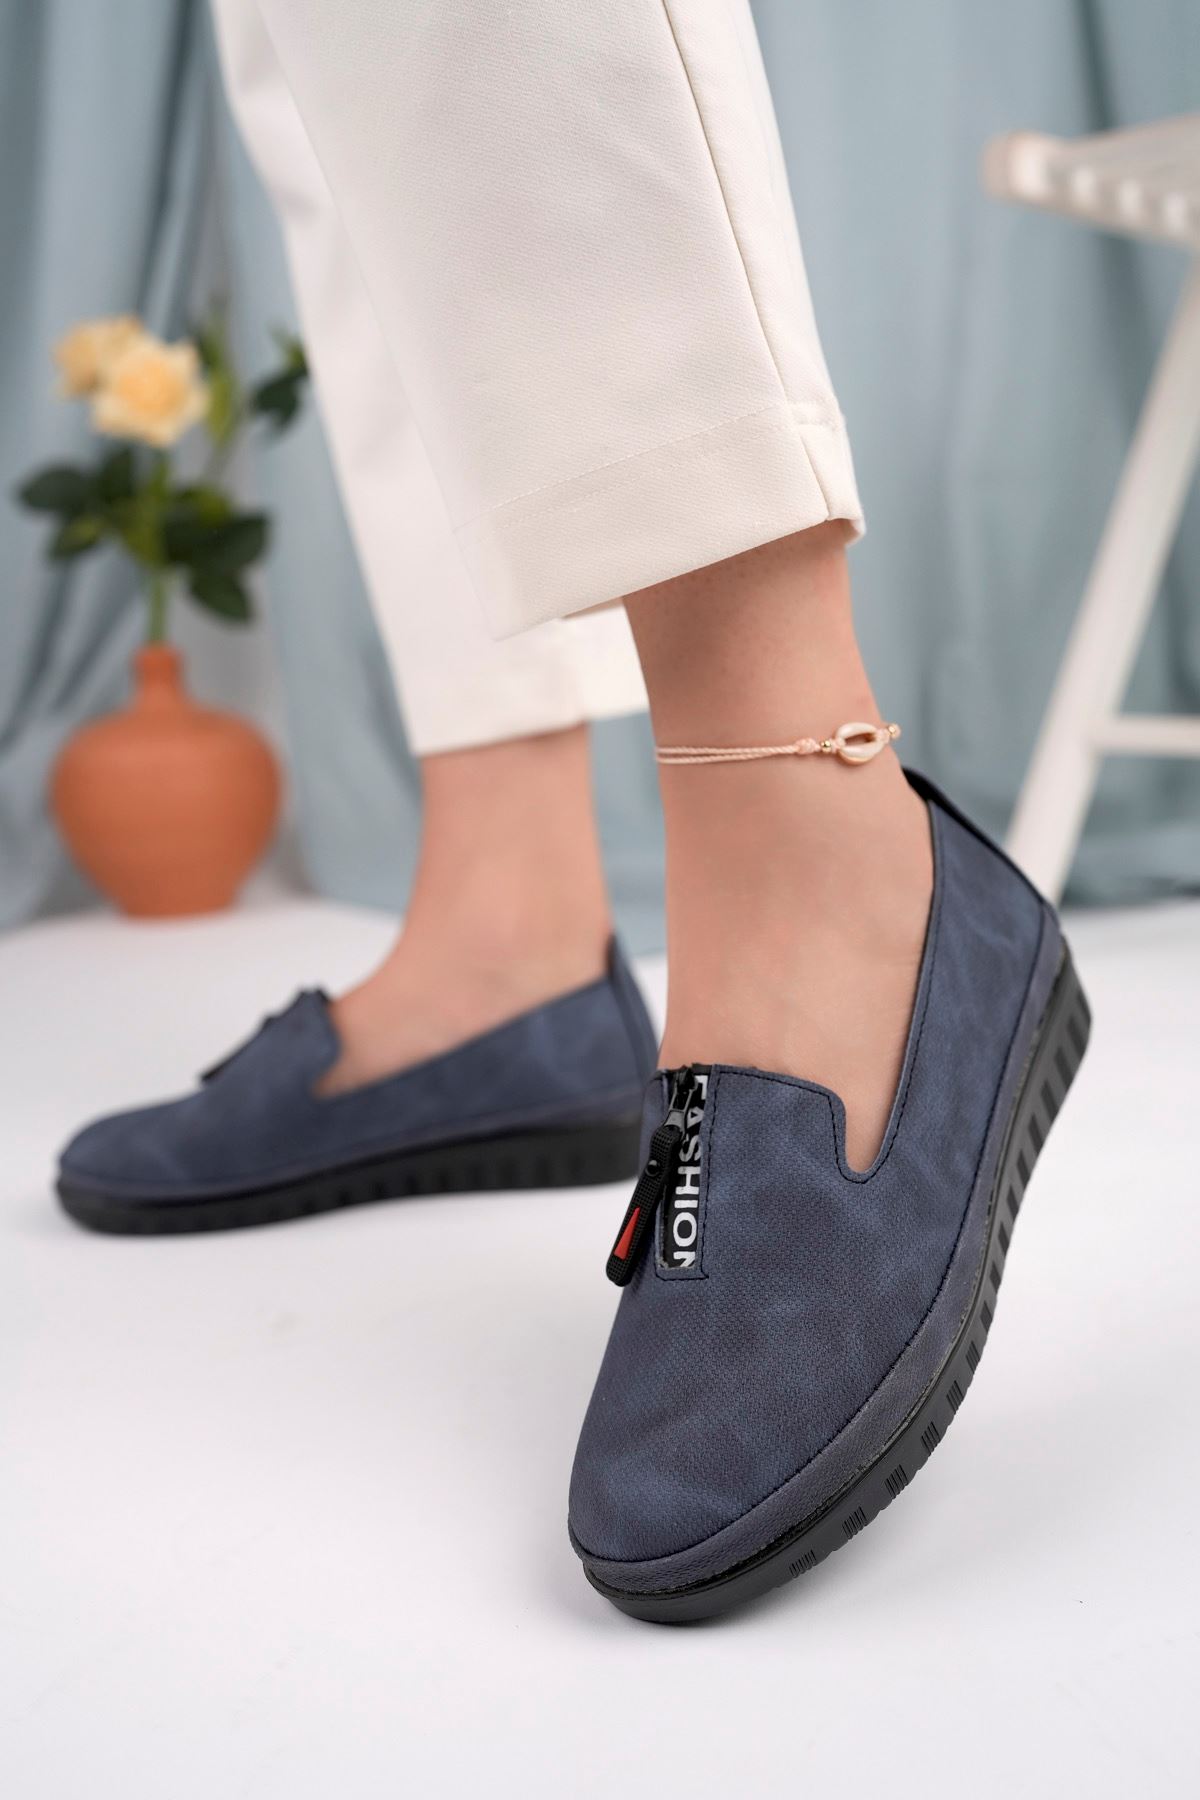 Orthopedic Sole Navy Blue Shoes with Zipper Detail